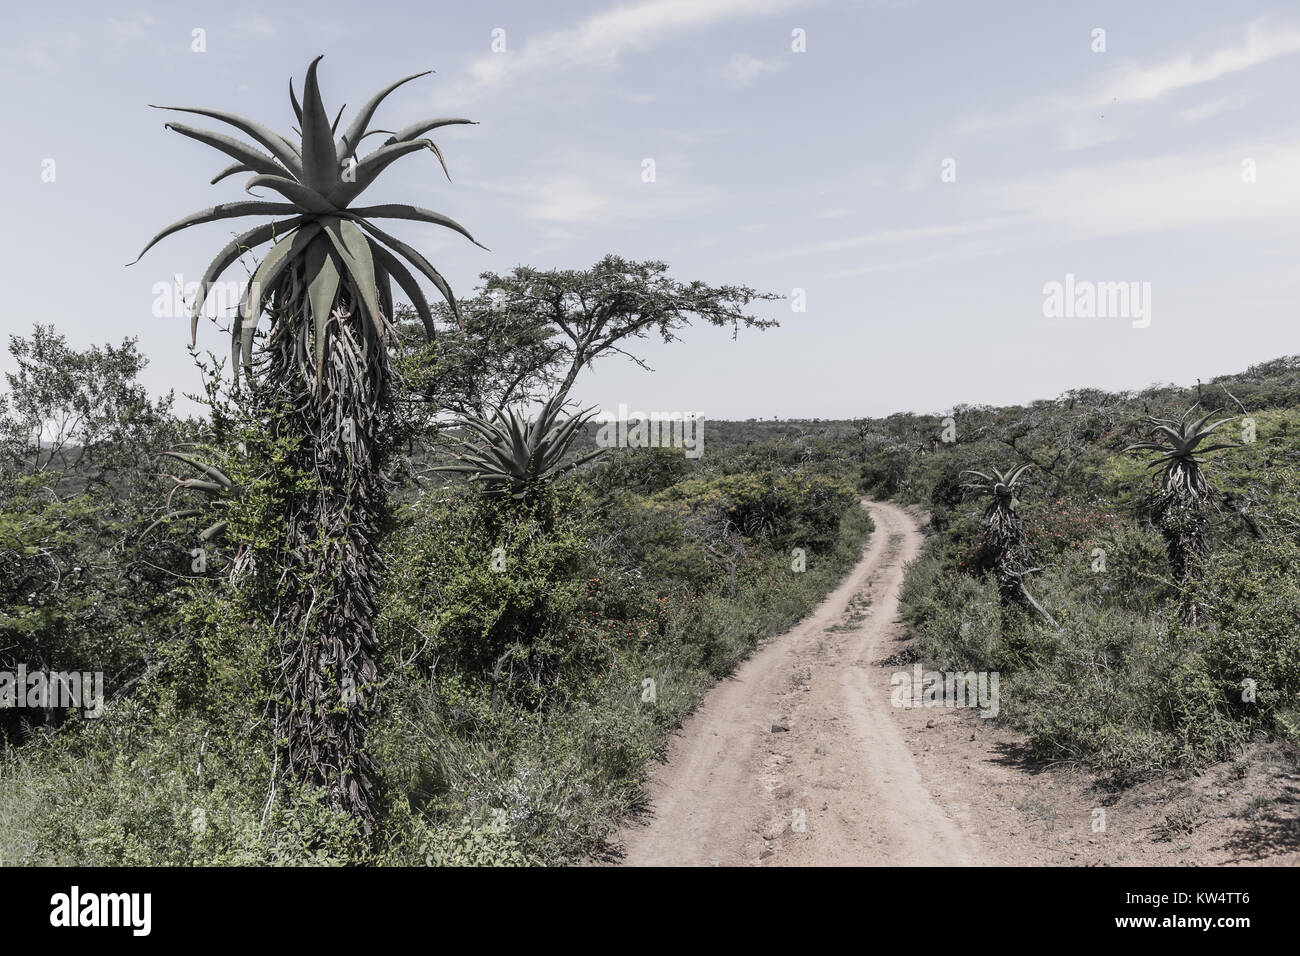 Wilderness wildlife terrain with dirt road track through thick trees aloes bush vegetation landscape vintage photo. Stock Photo